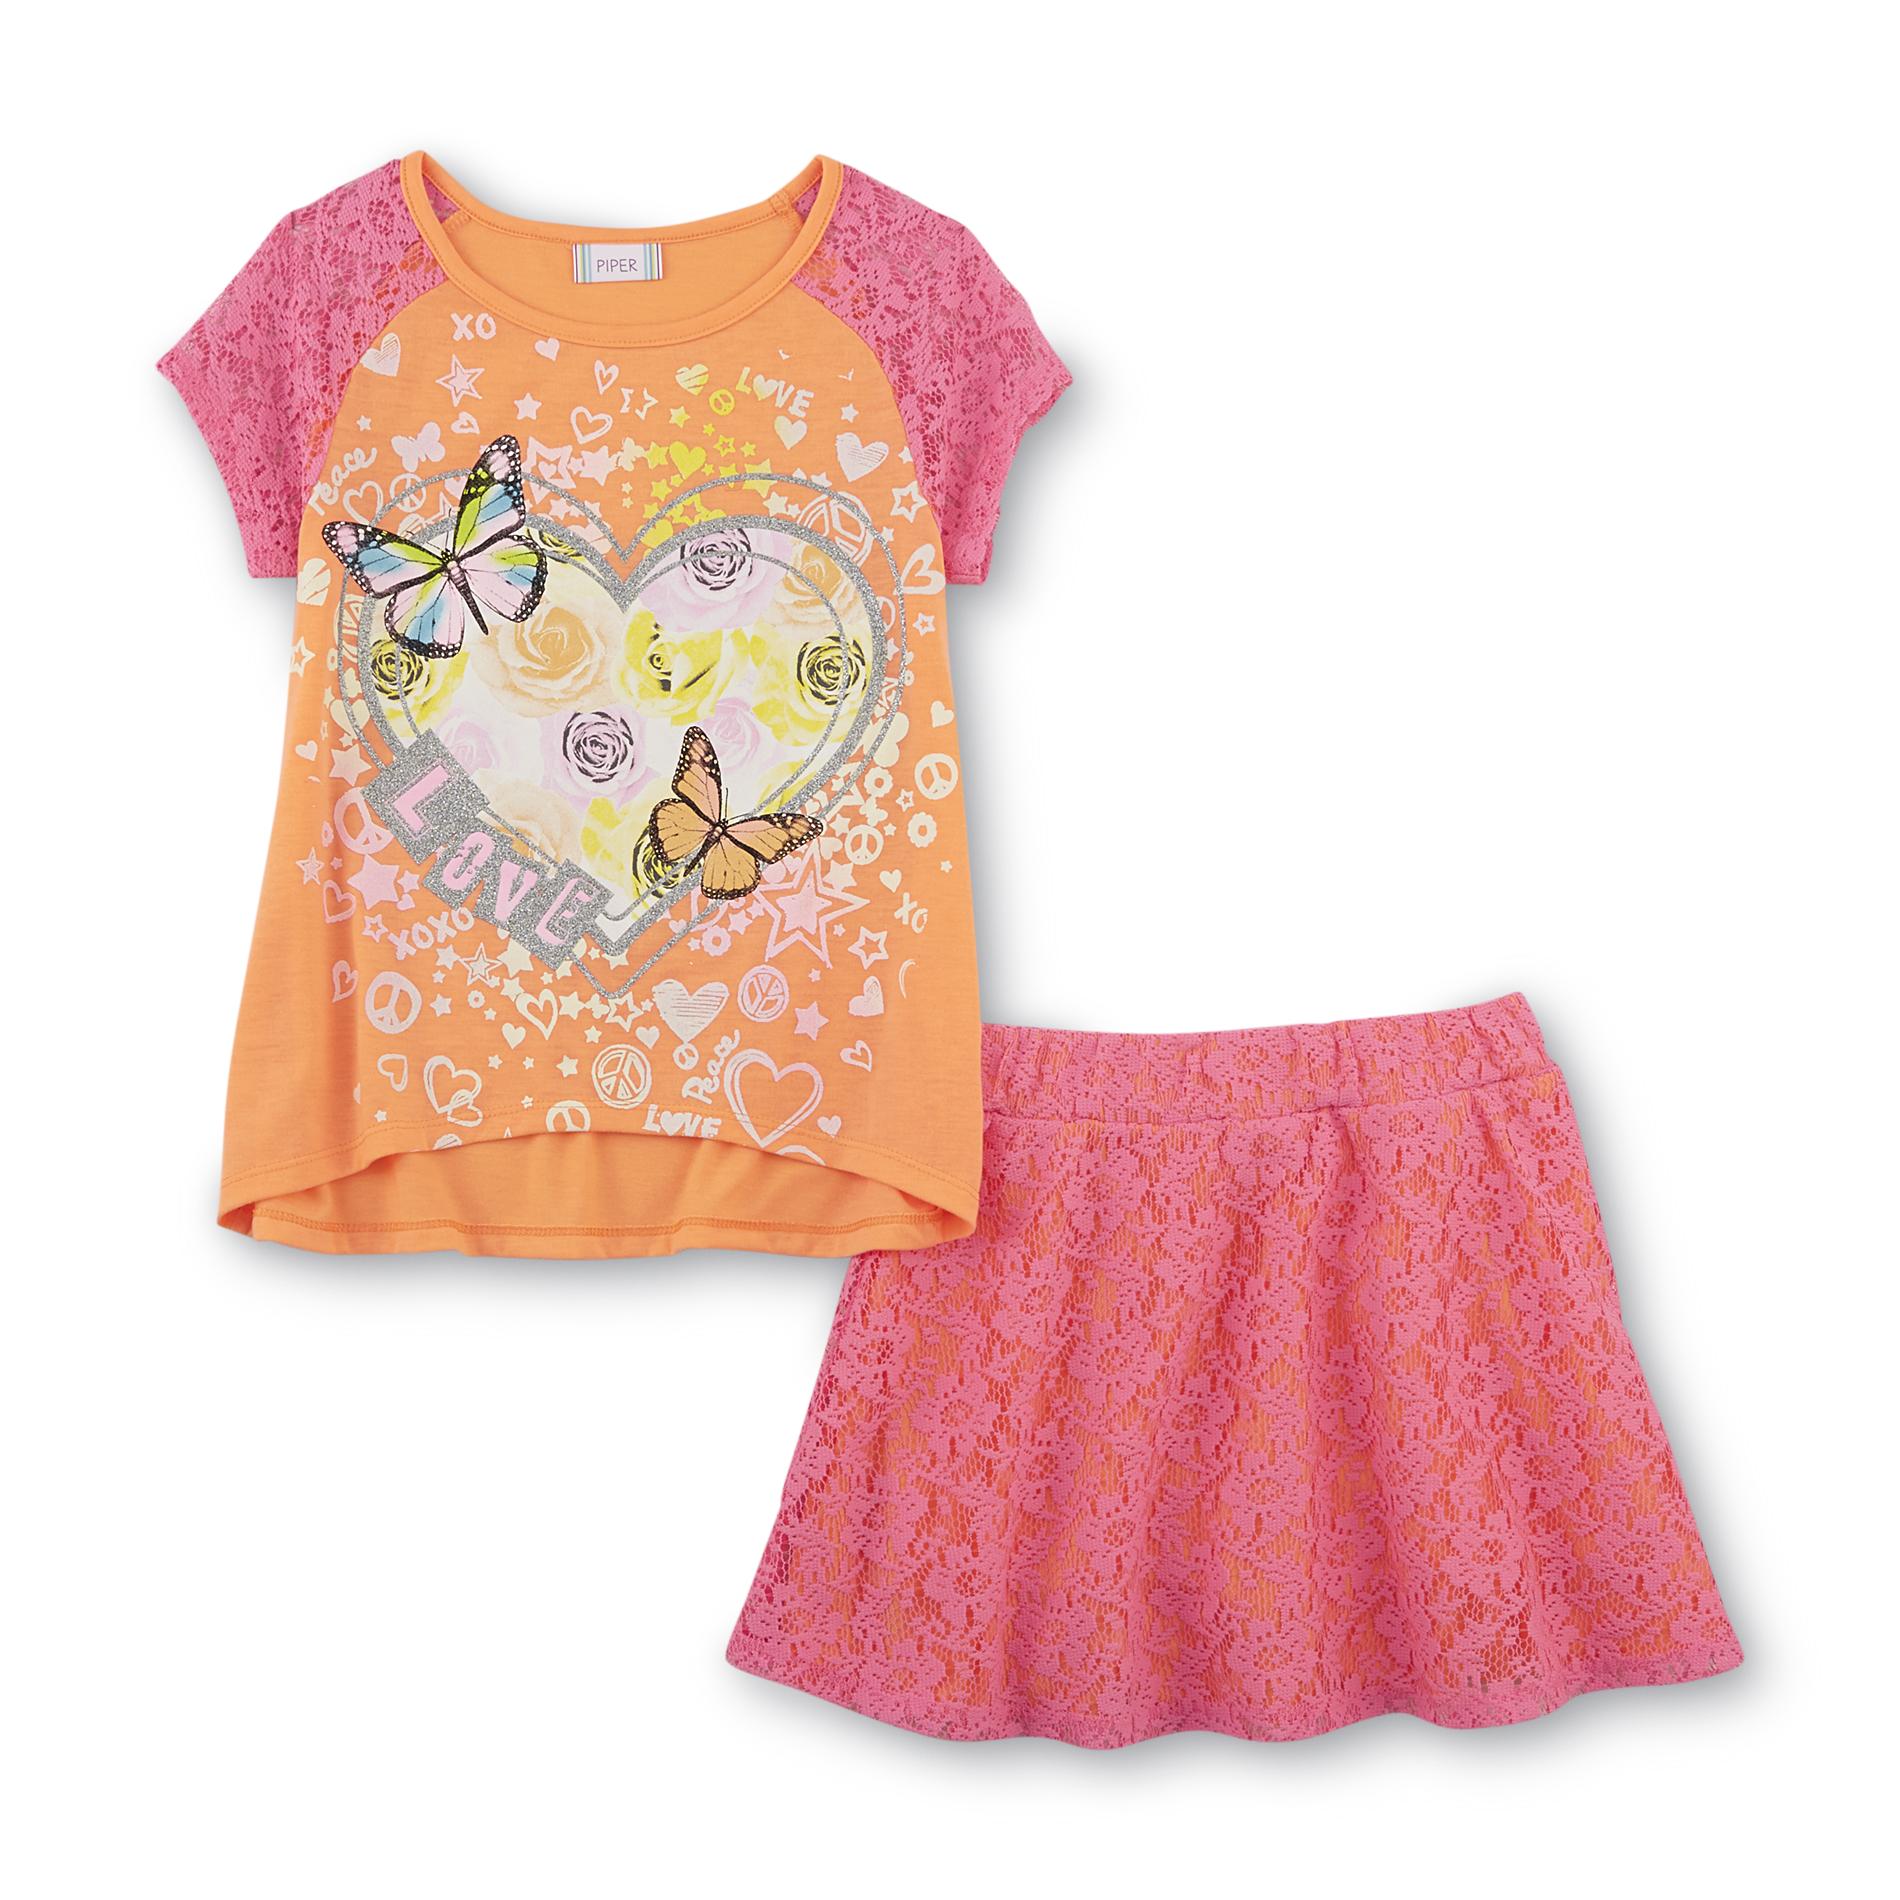 Piper Girl's Neon Lace Top & Scooter Skirt - Love